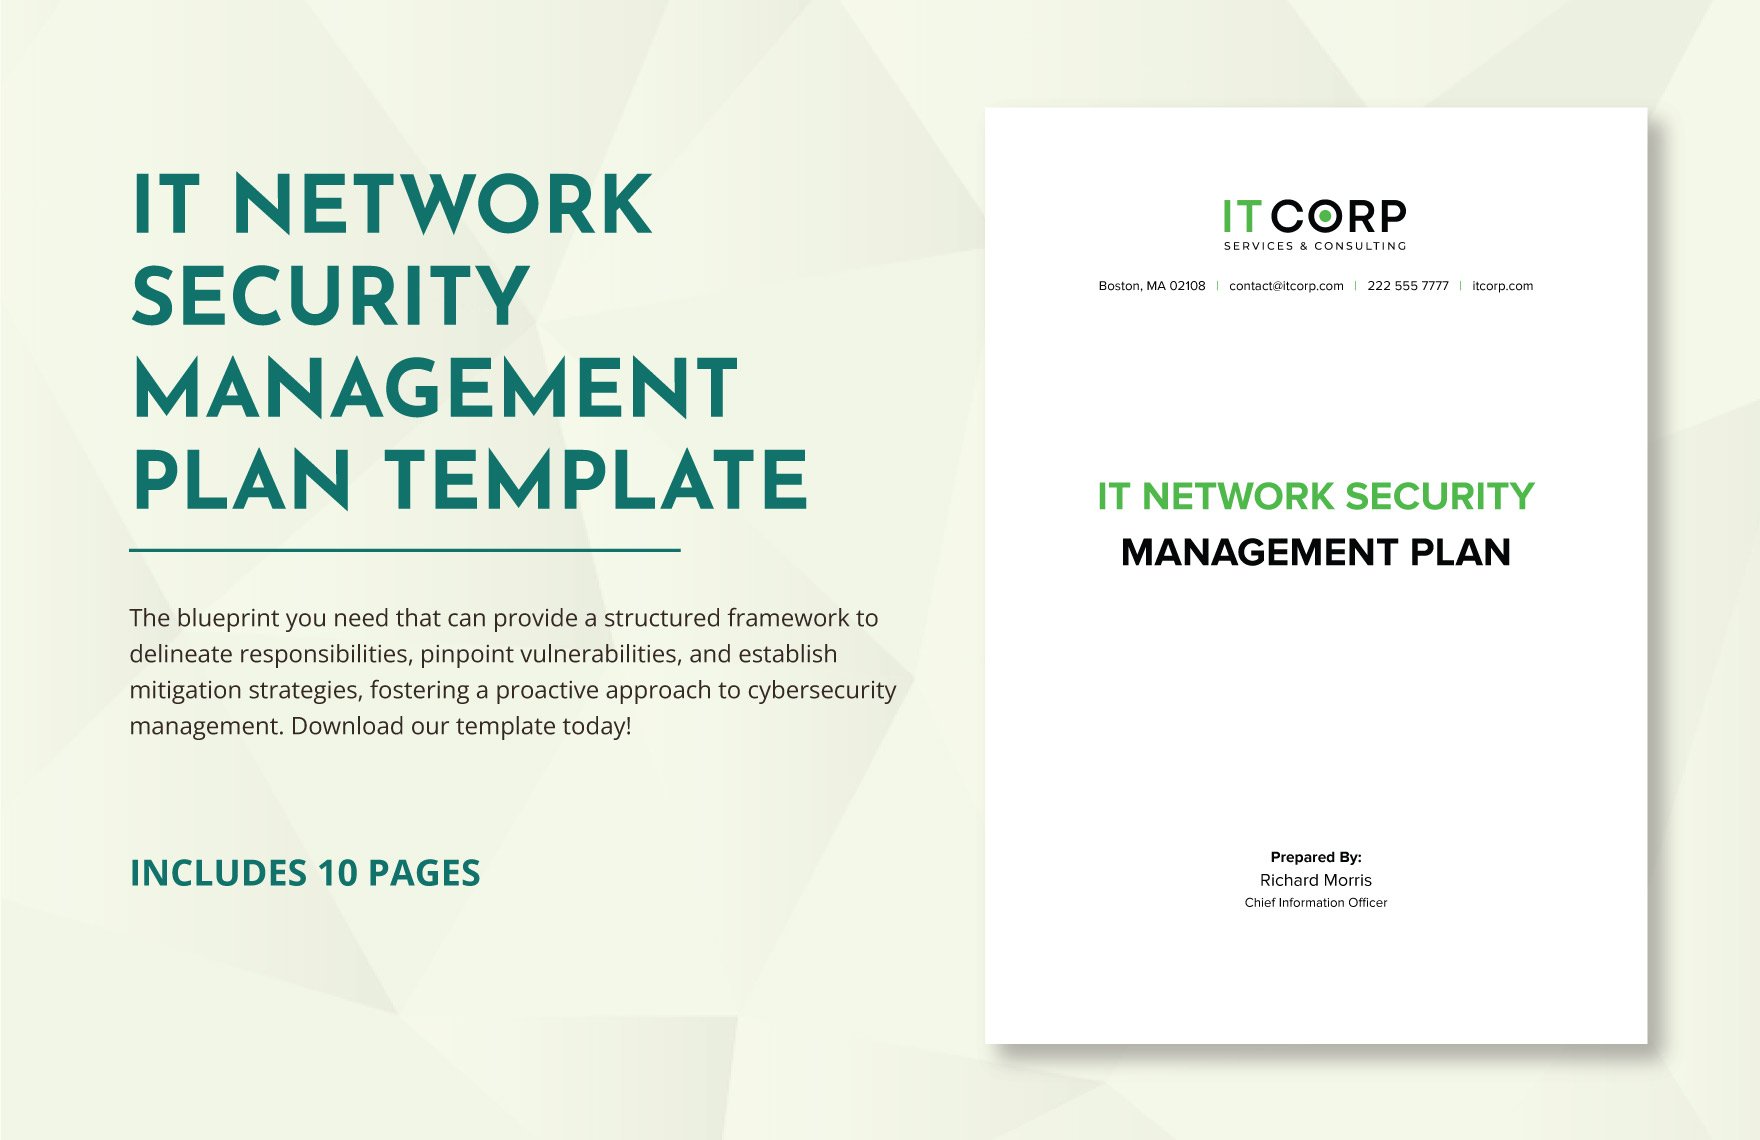 IT Network Security Management Plan Template